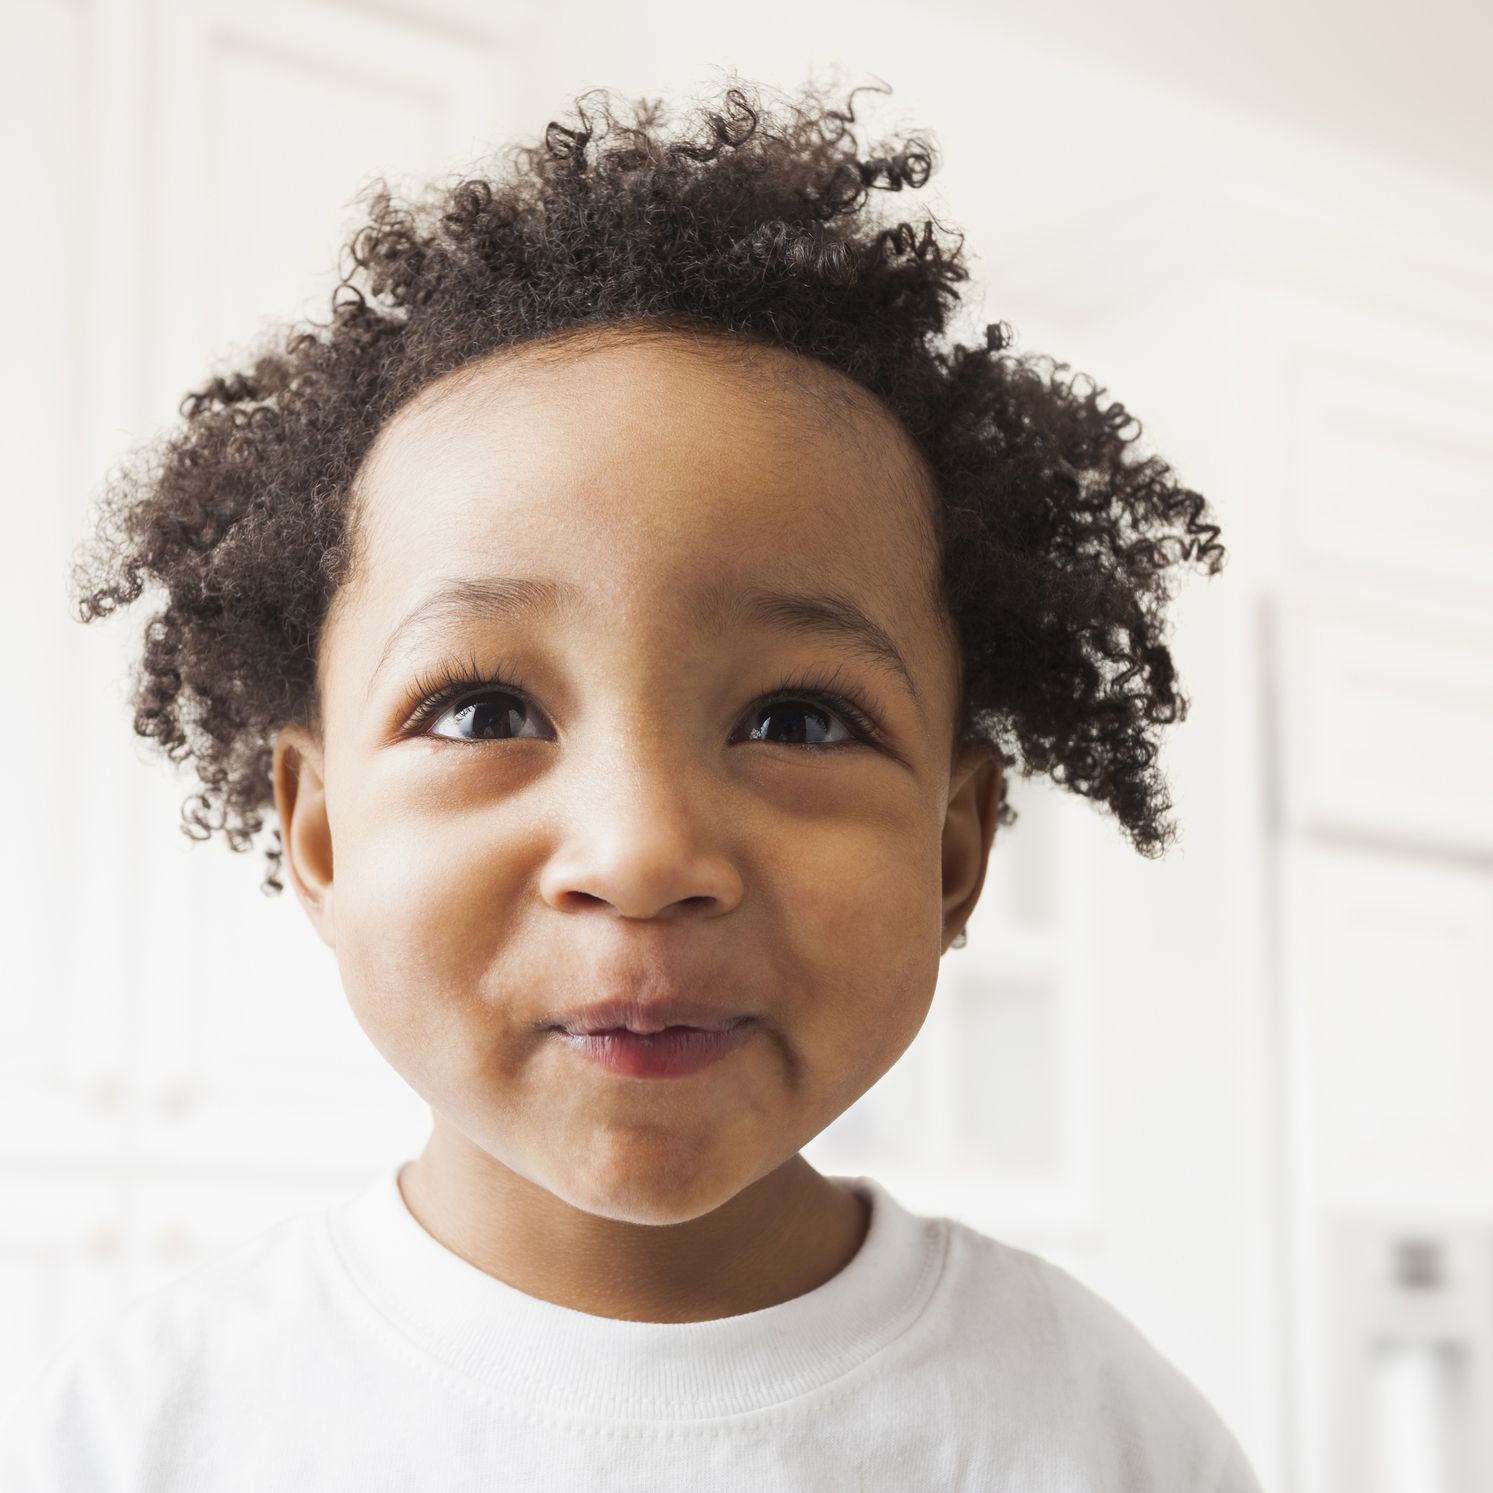 300+ Black Baby Boy Names to Help Your Little Man Stand Out